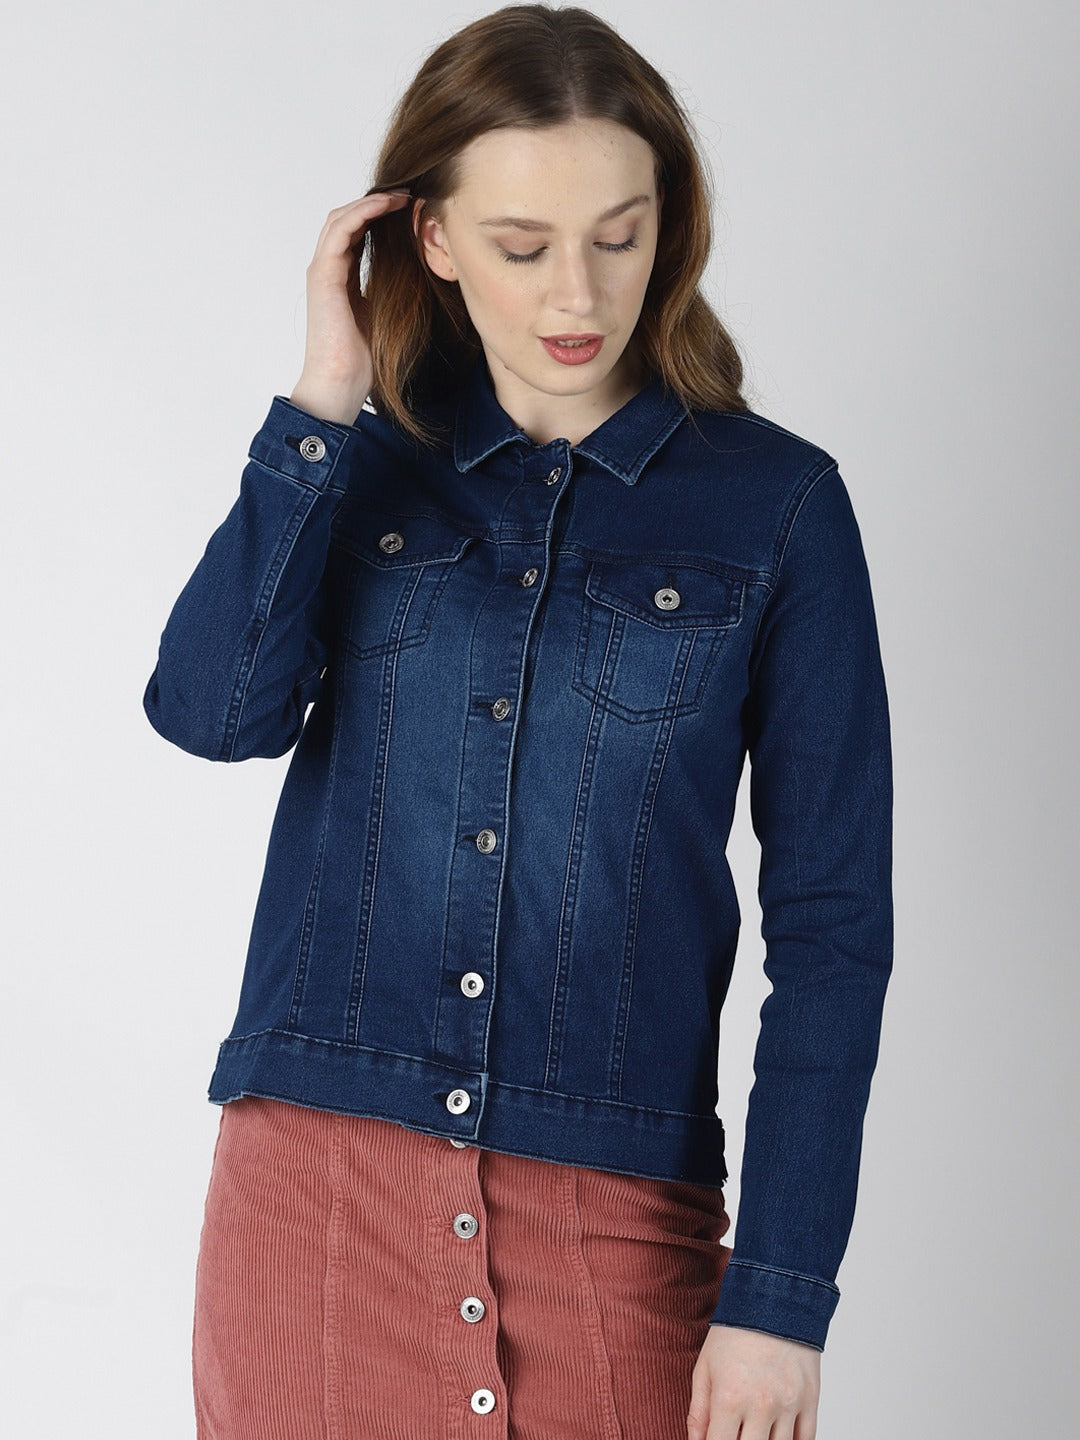 Dark blue denim jacket for women, with button-front closure and classic collar design.